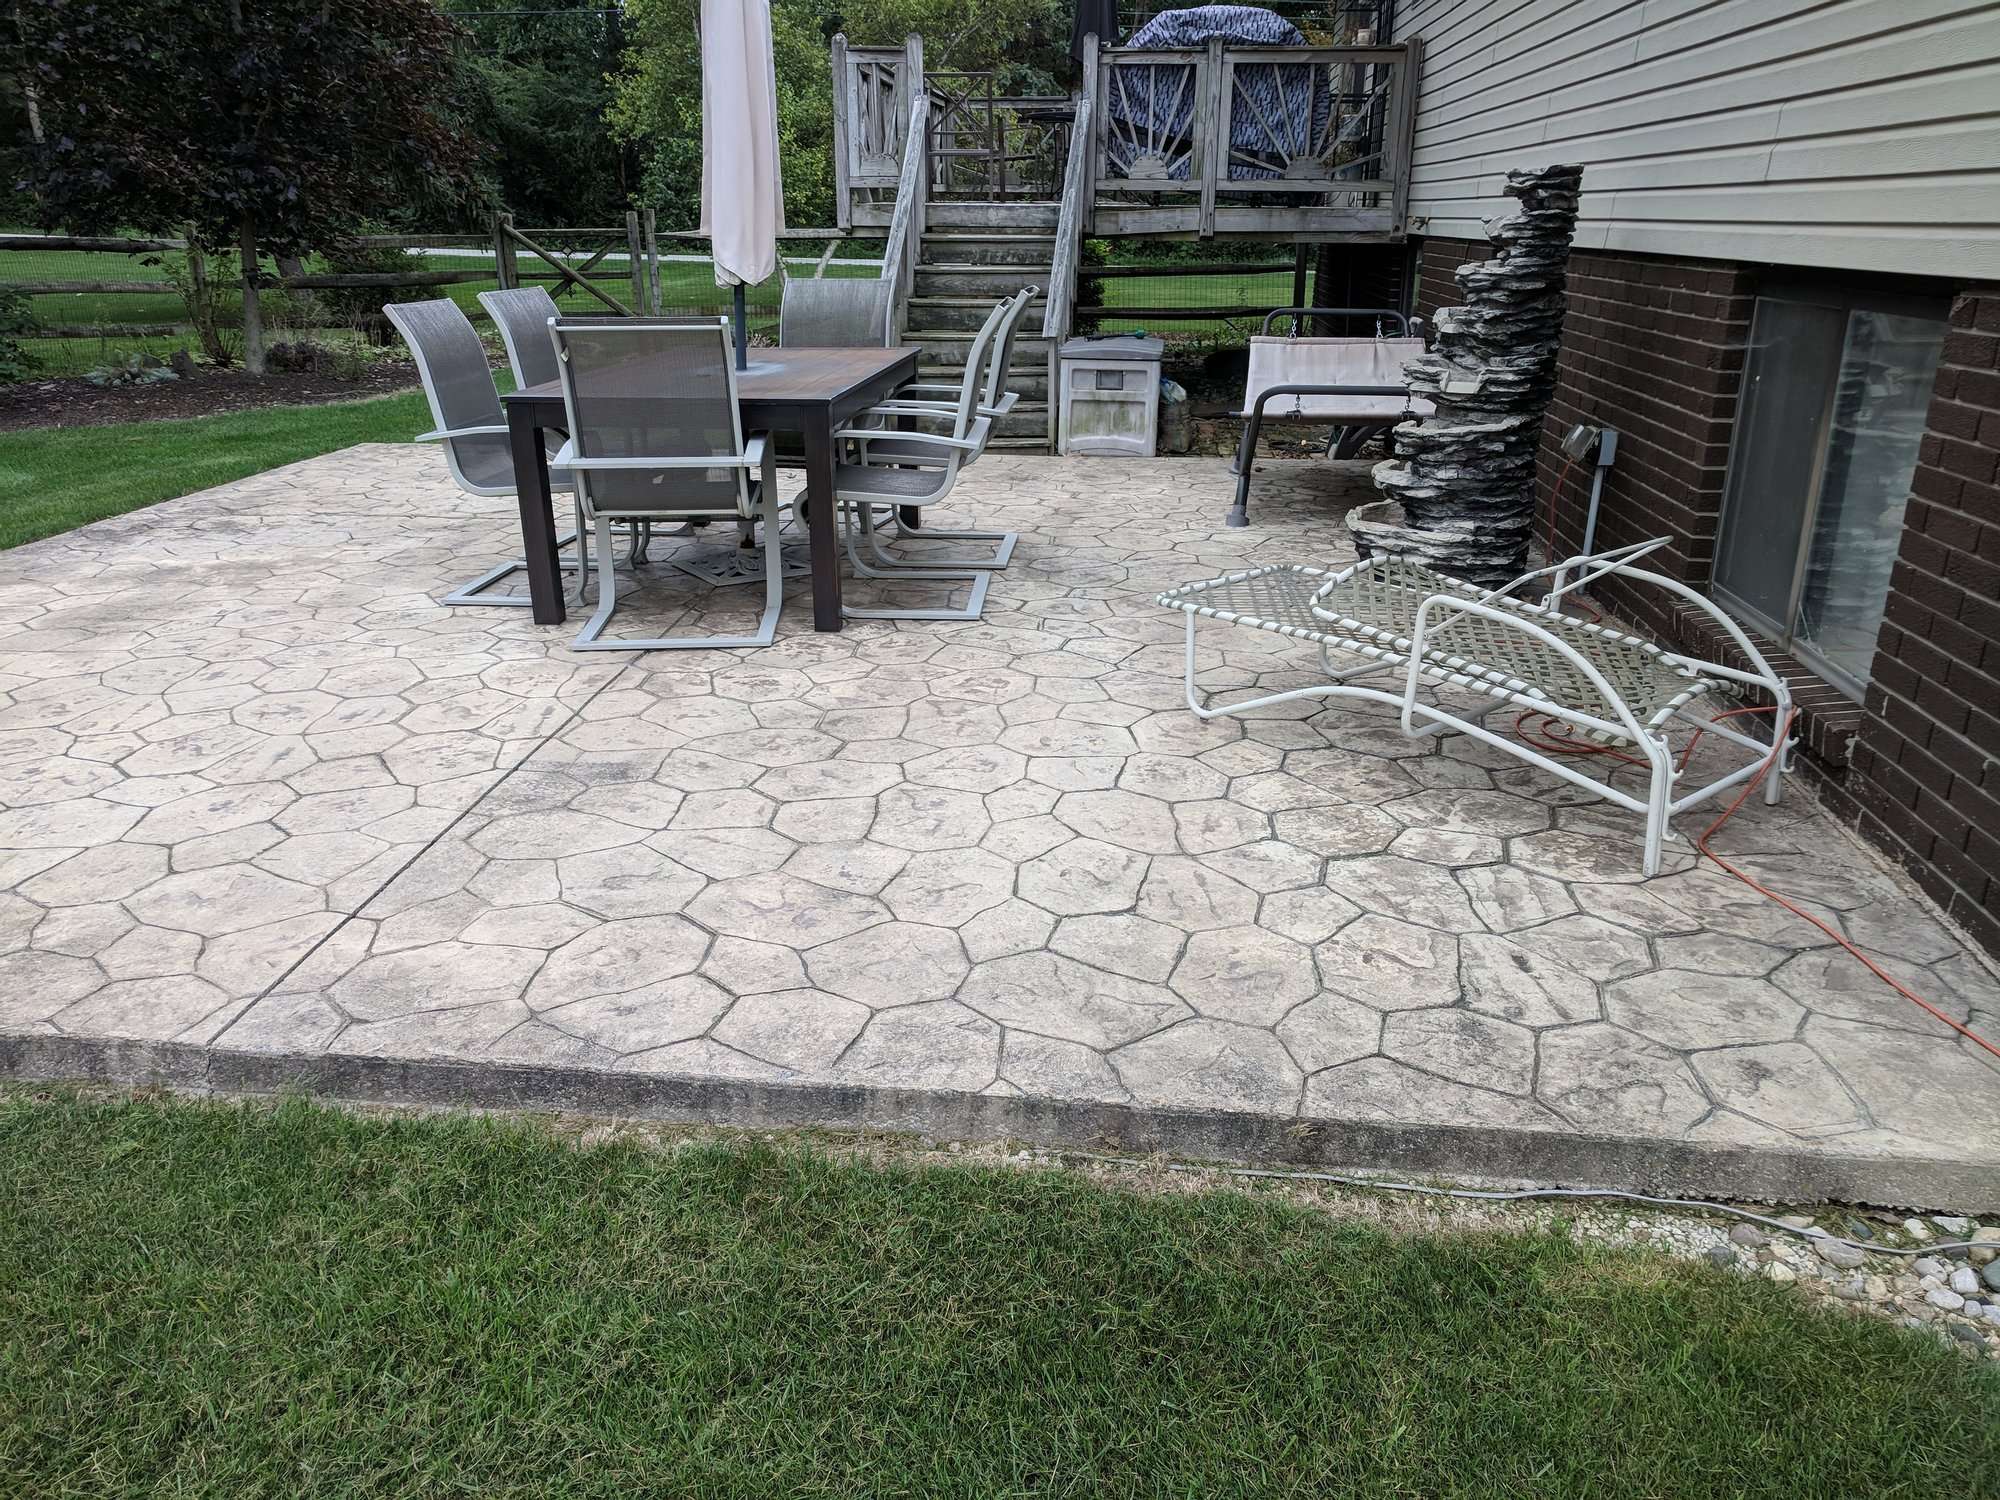 How to cover/treat concrete patio and what to use?